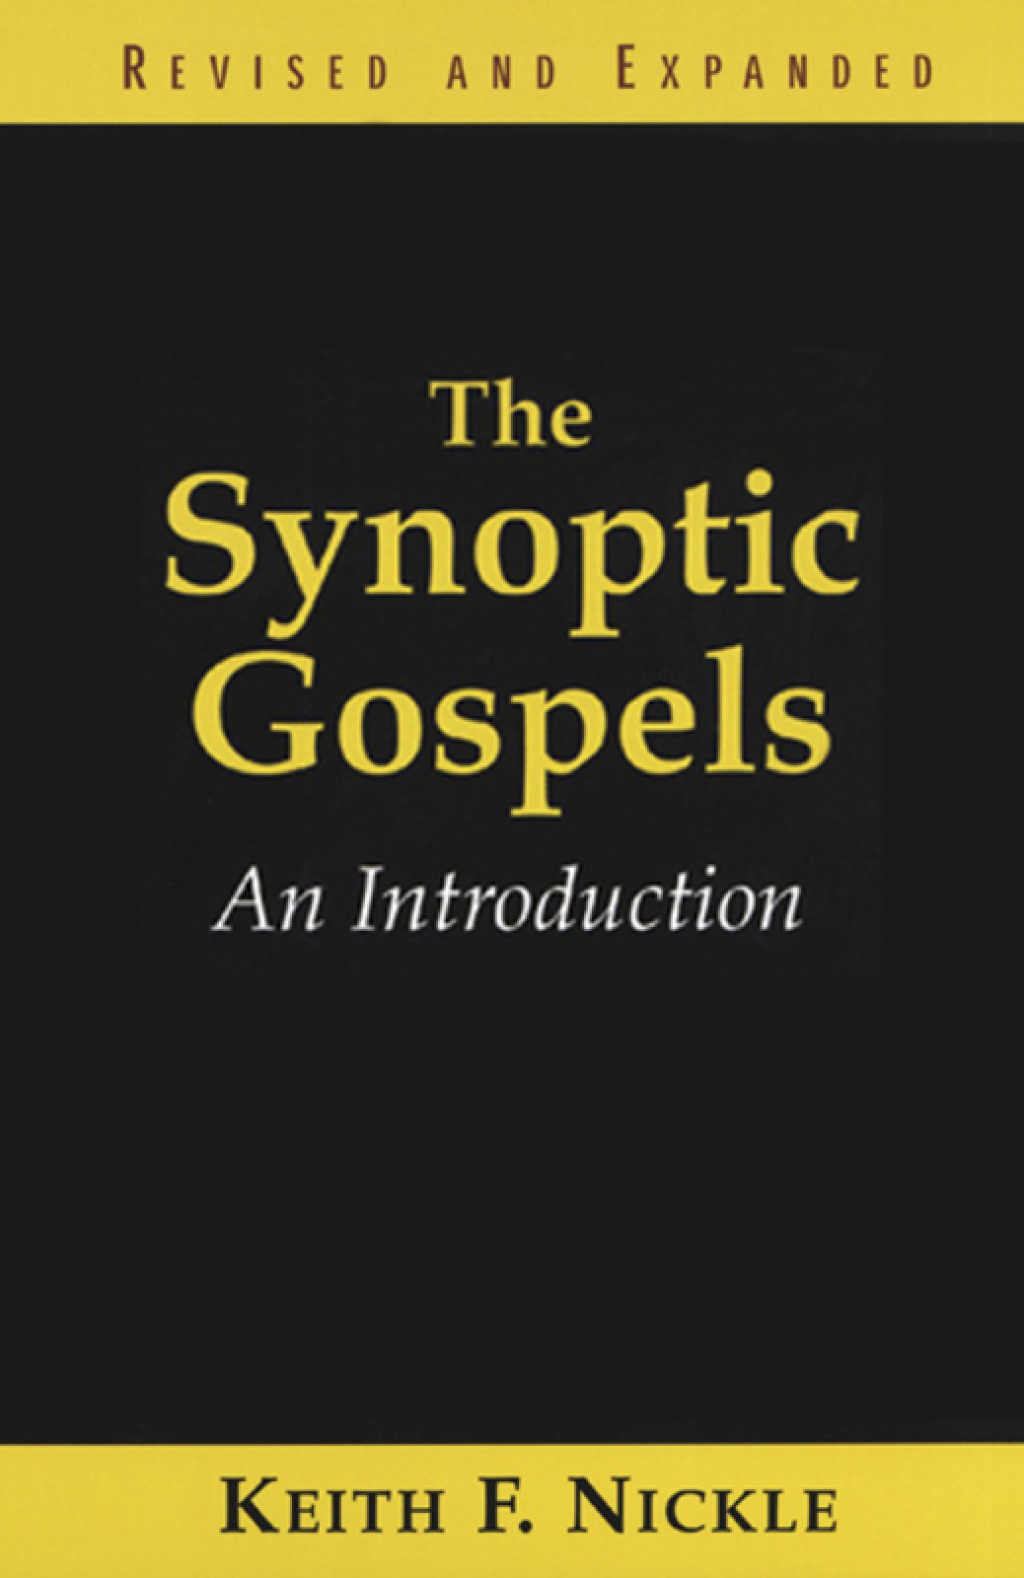 The Synoptic Gospels  Revised and Expanded (eBook) - Keith F. Nickle,